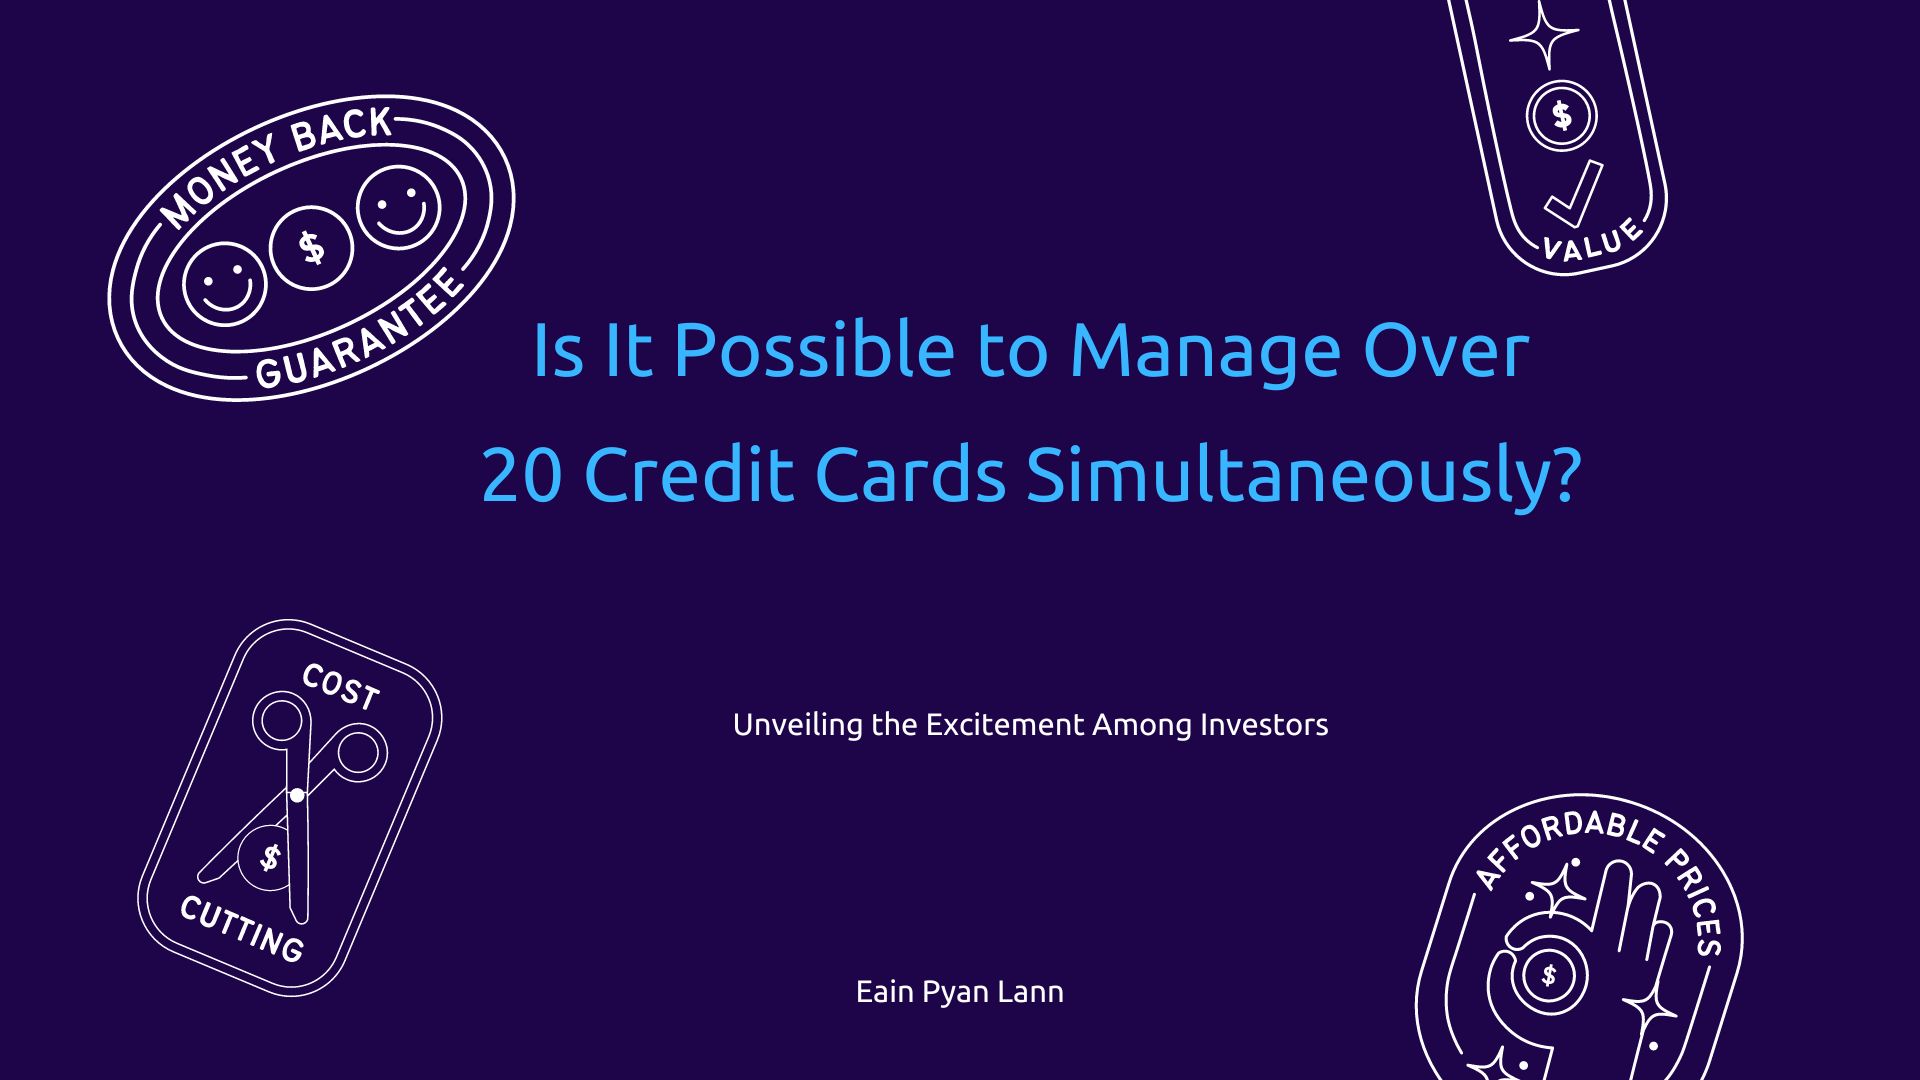 Is It Possible to Manage Over 20 Credit Cards Simultaneously?